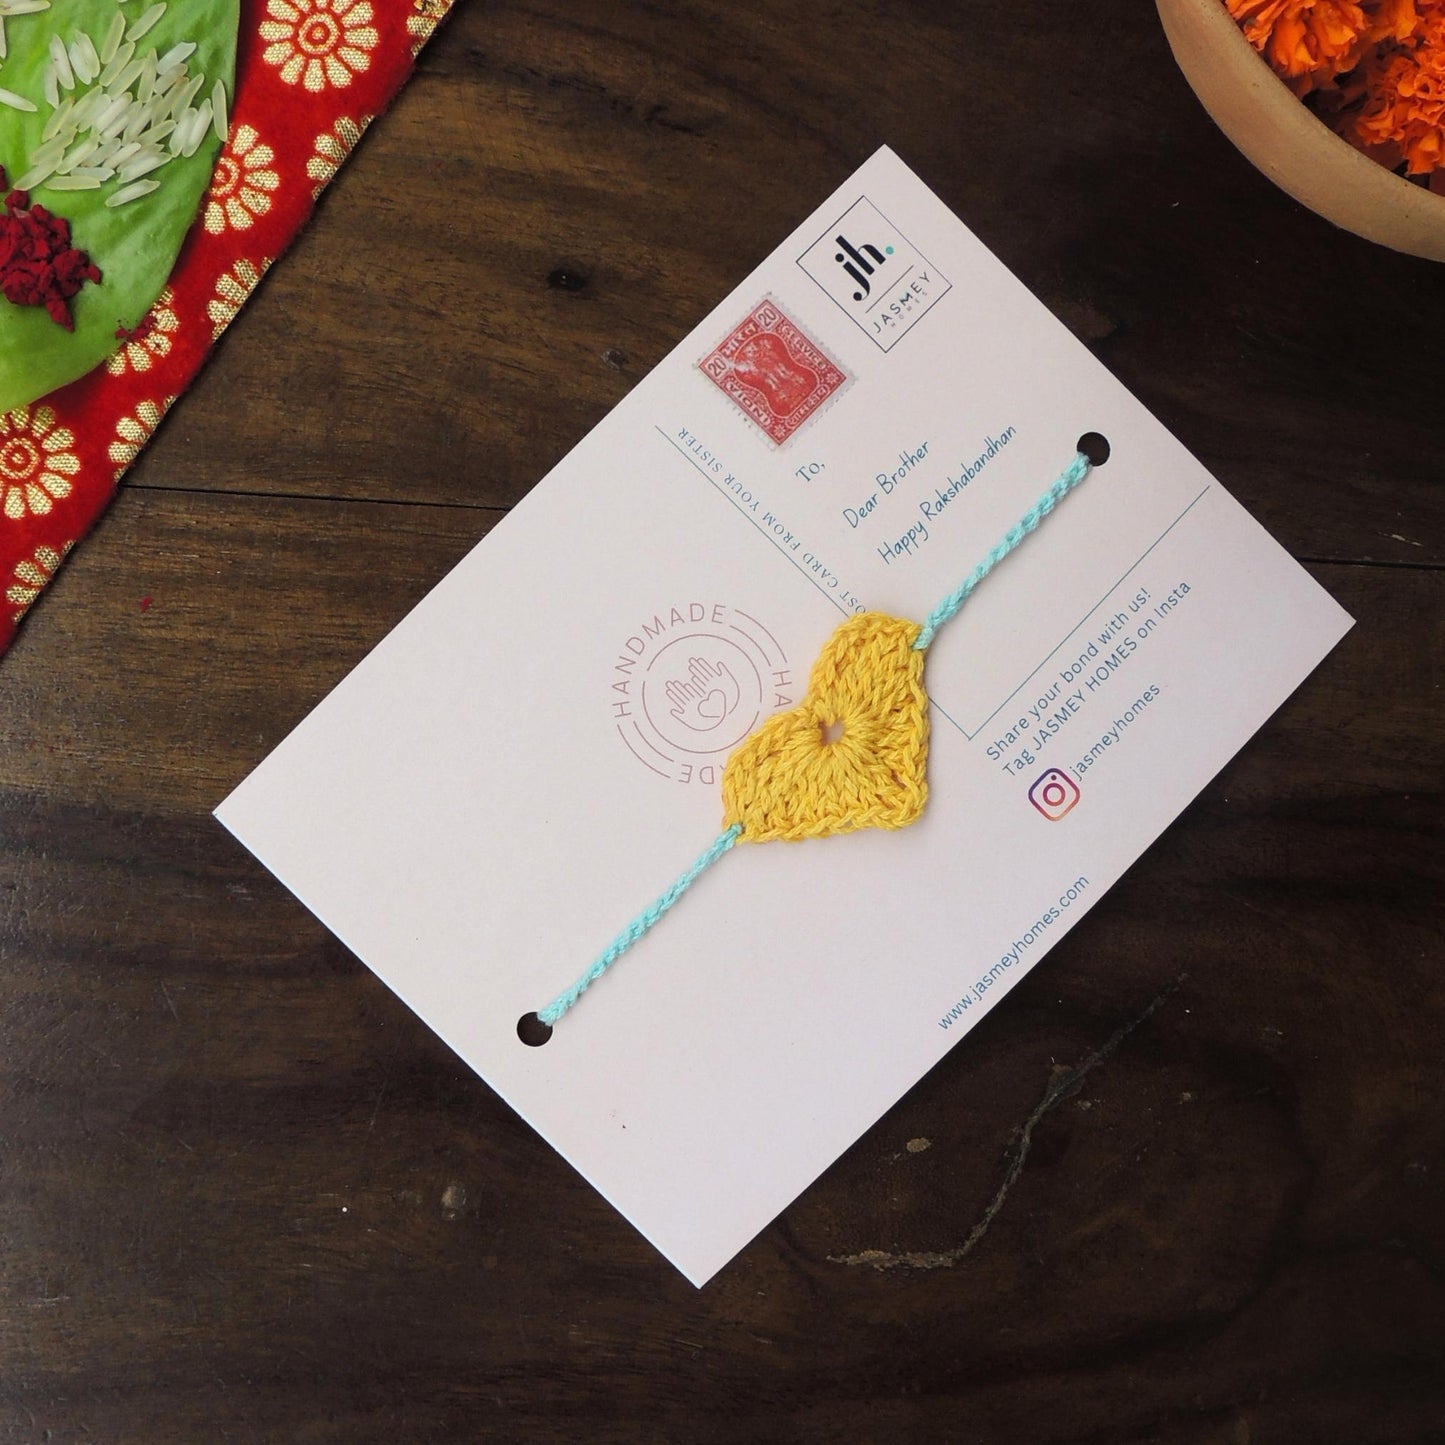 Set of 2 HEART Rakhi for Brother with Postcard - jasmeyhomes